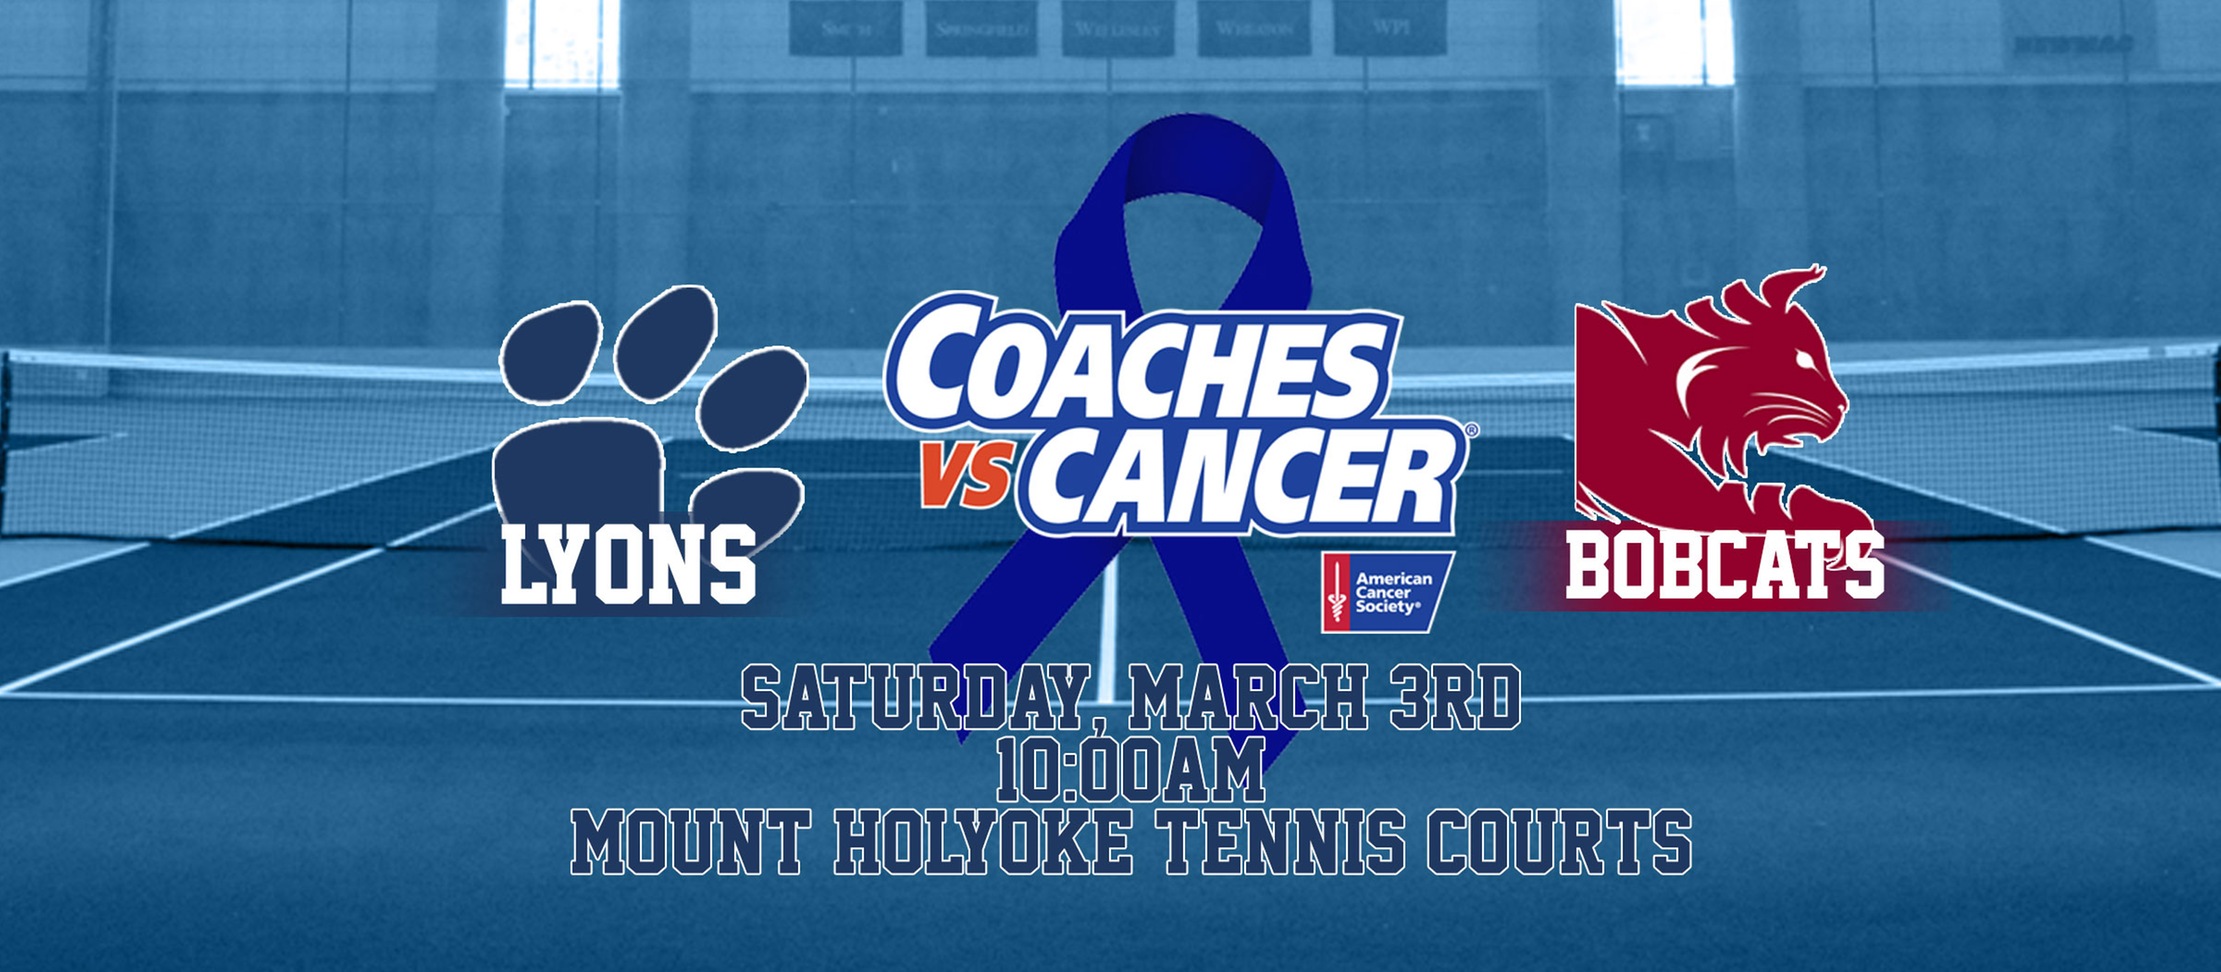 Coaches vs Cancer gameday central graphic for tennis.